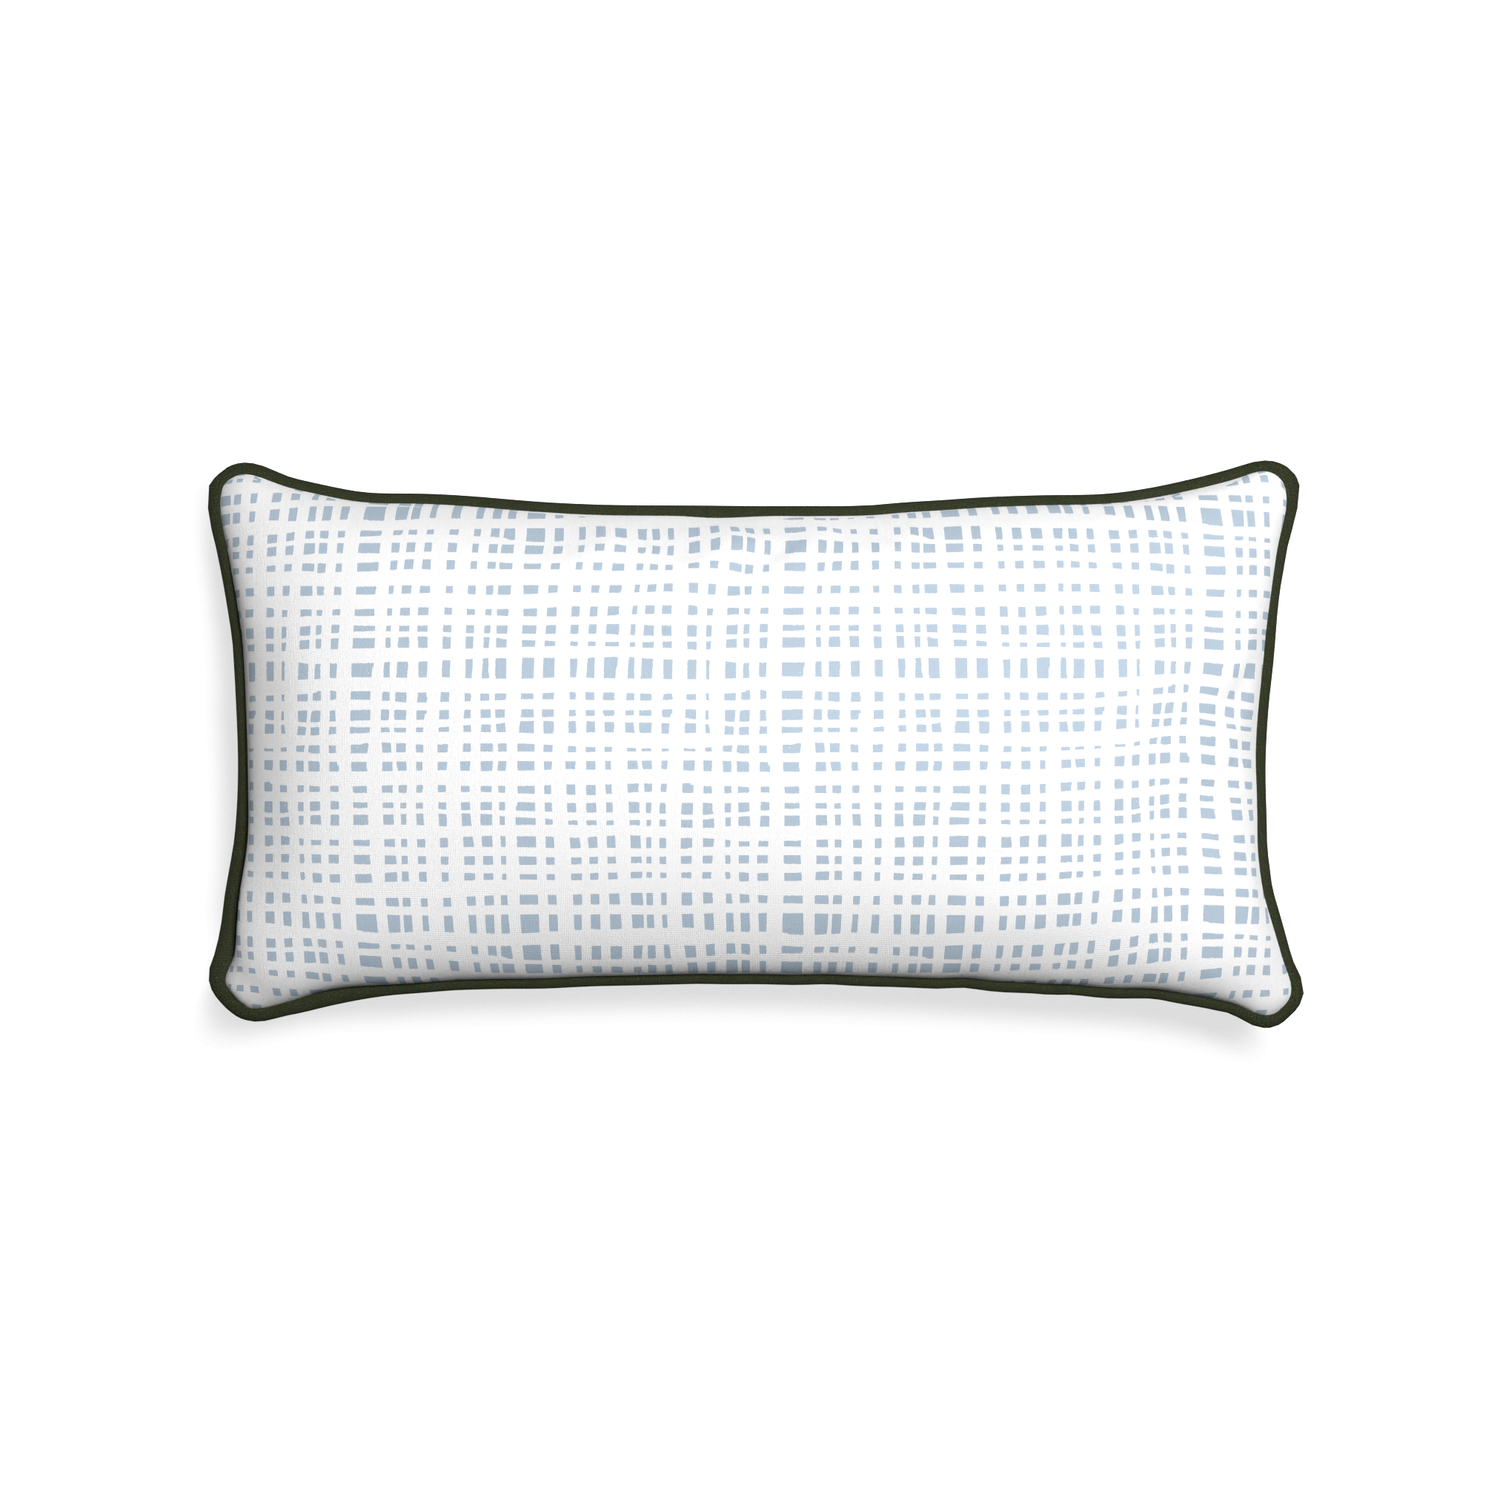 Midi-lumbar ginger custom plaid sky bluepillow with f piping on white background